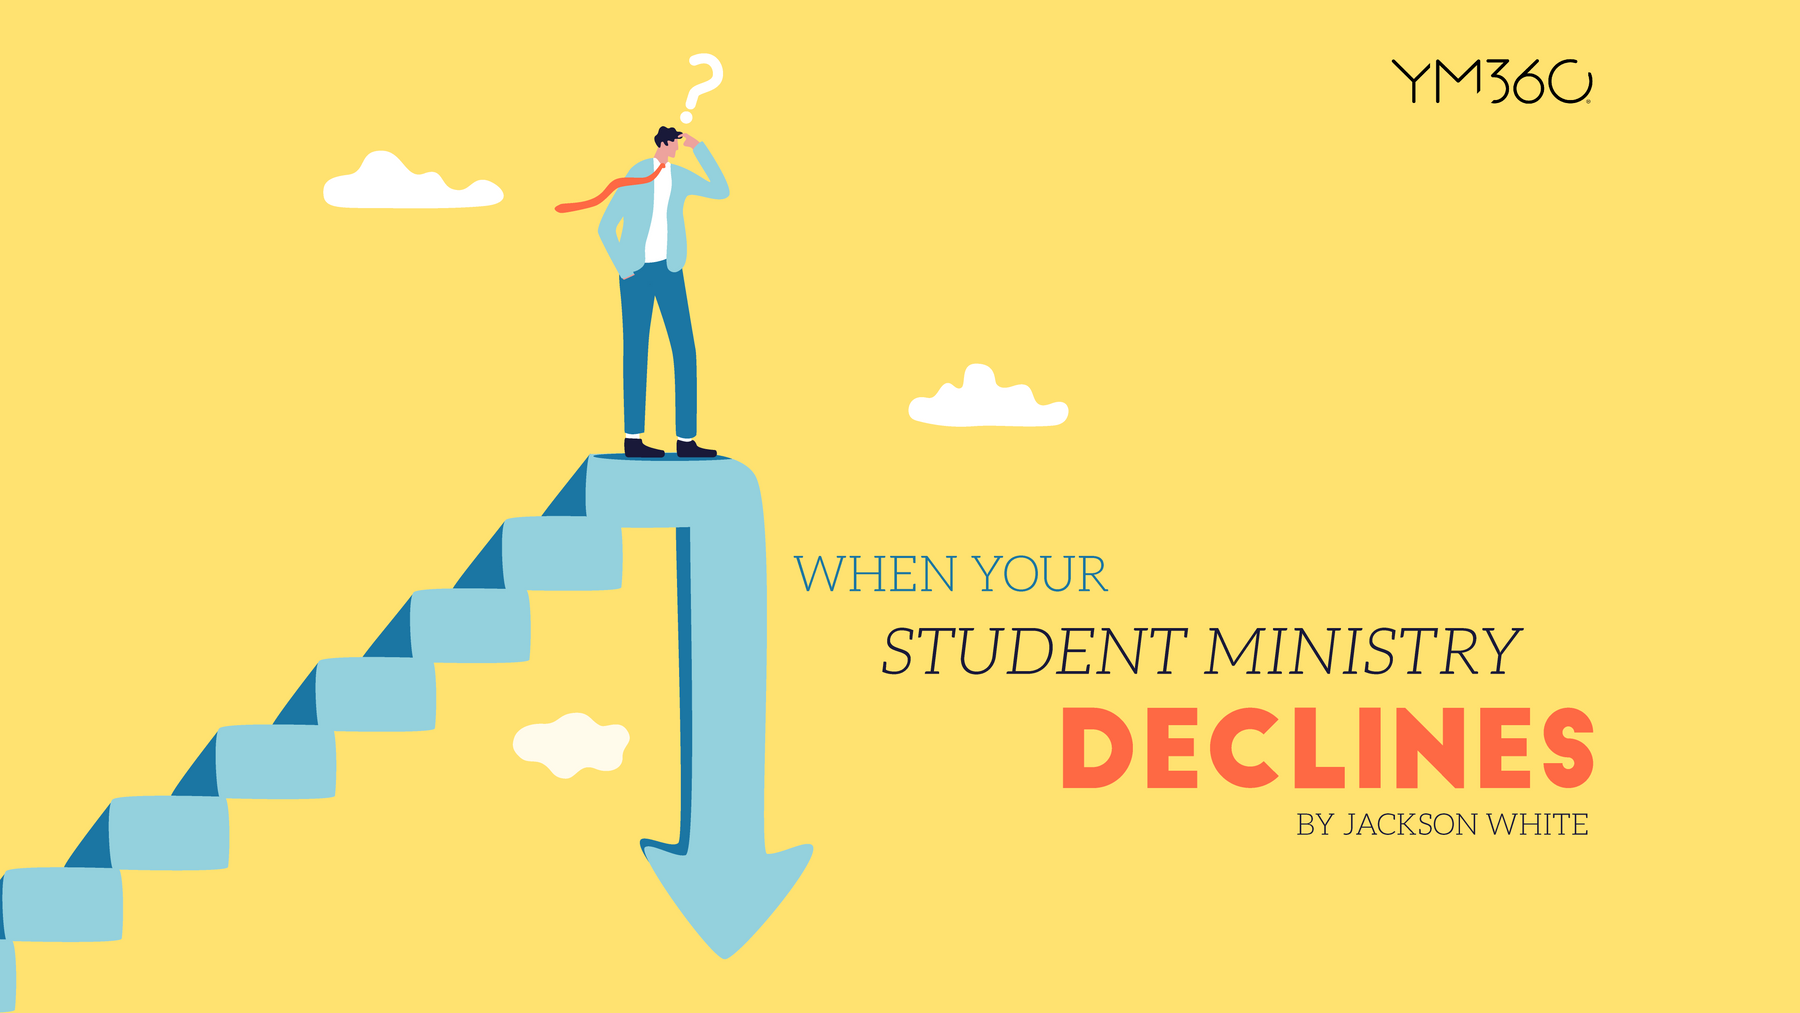 5 Tips When Your Student Ministry Declines